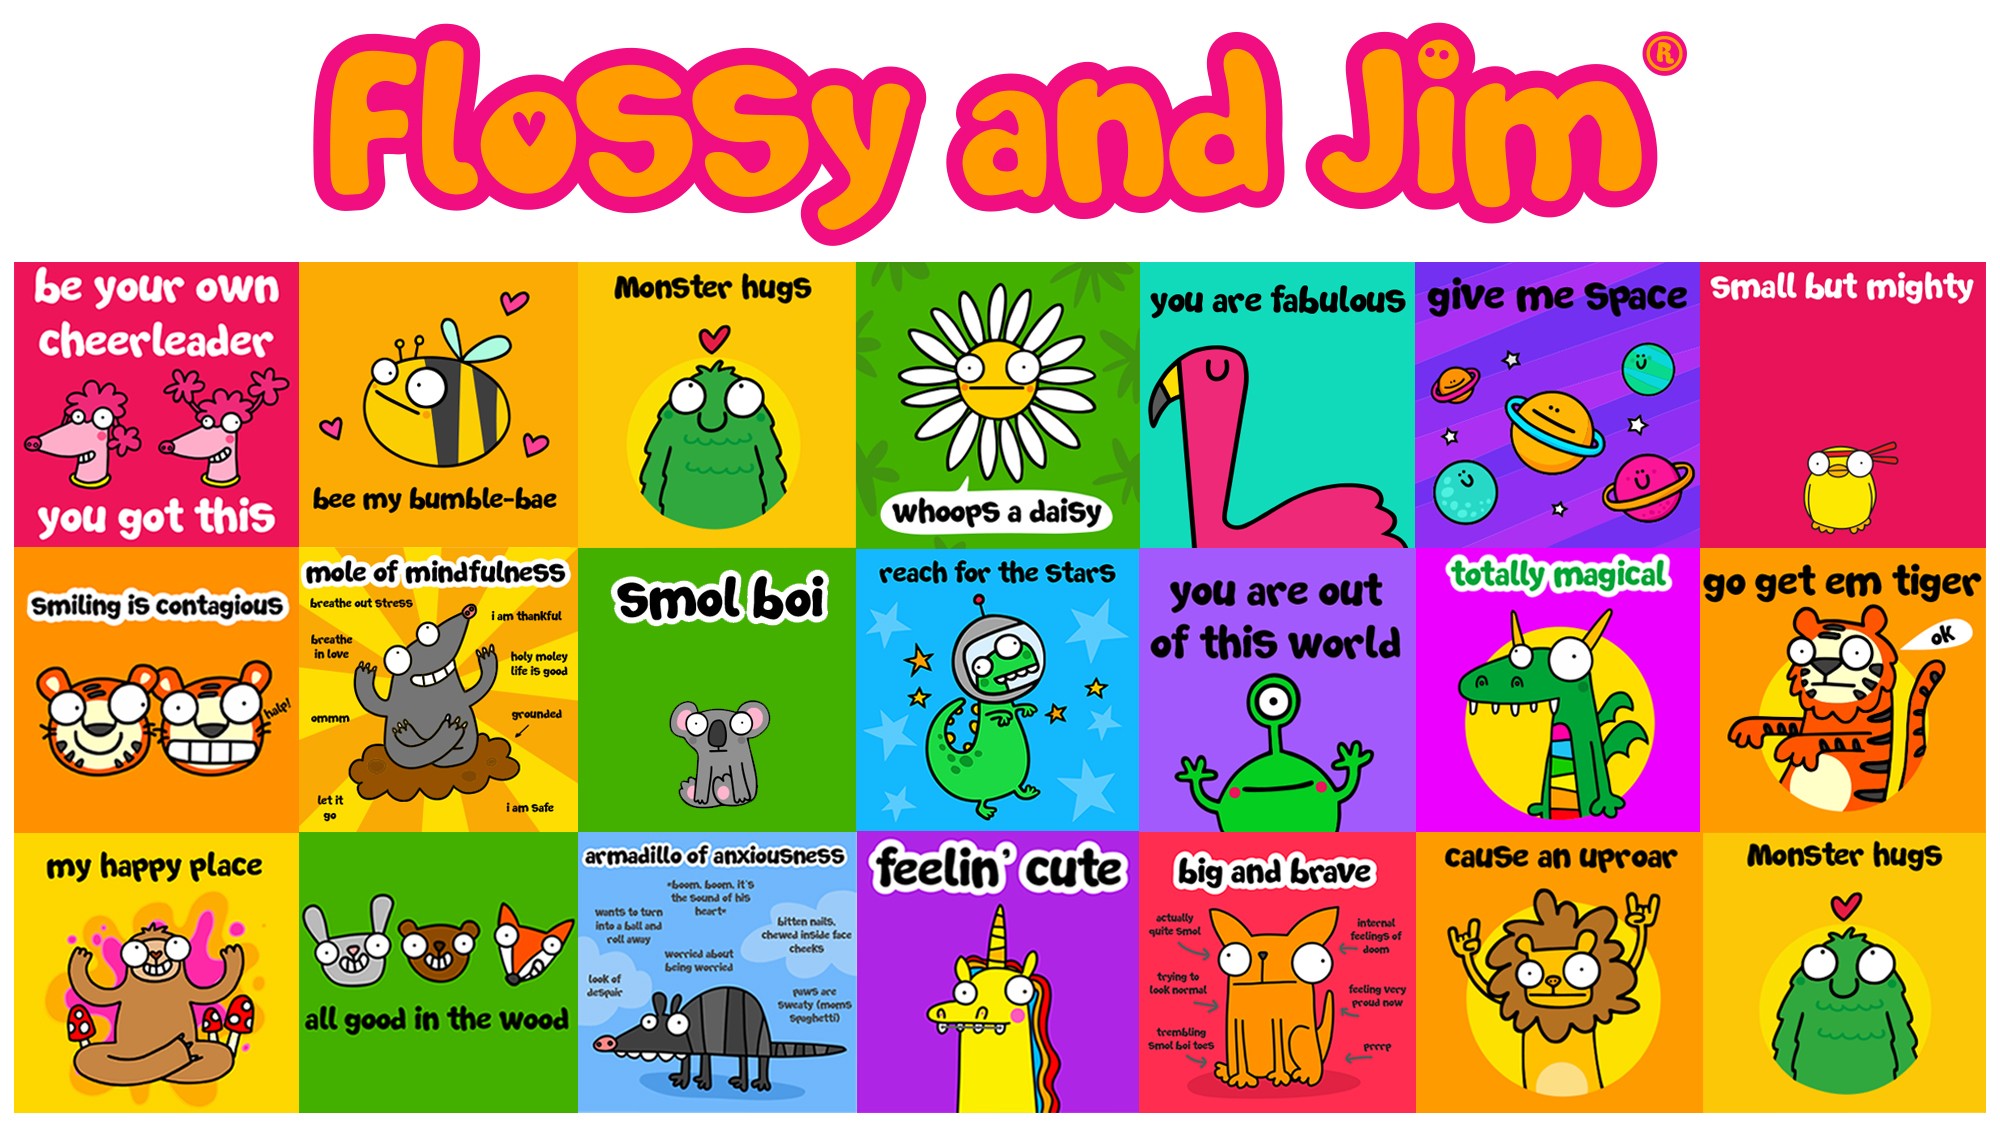 Flossy and Jim